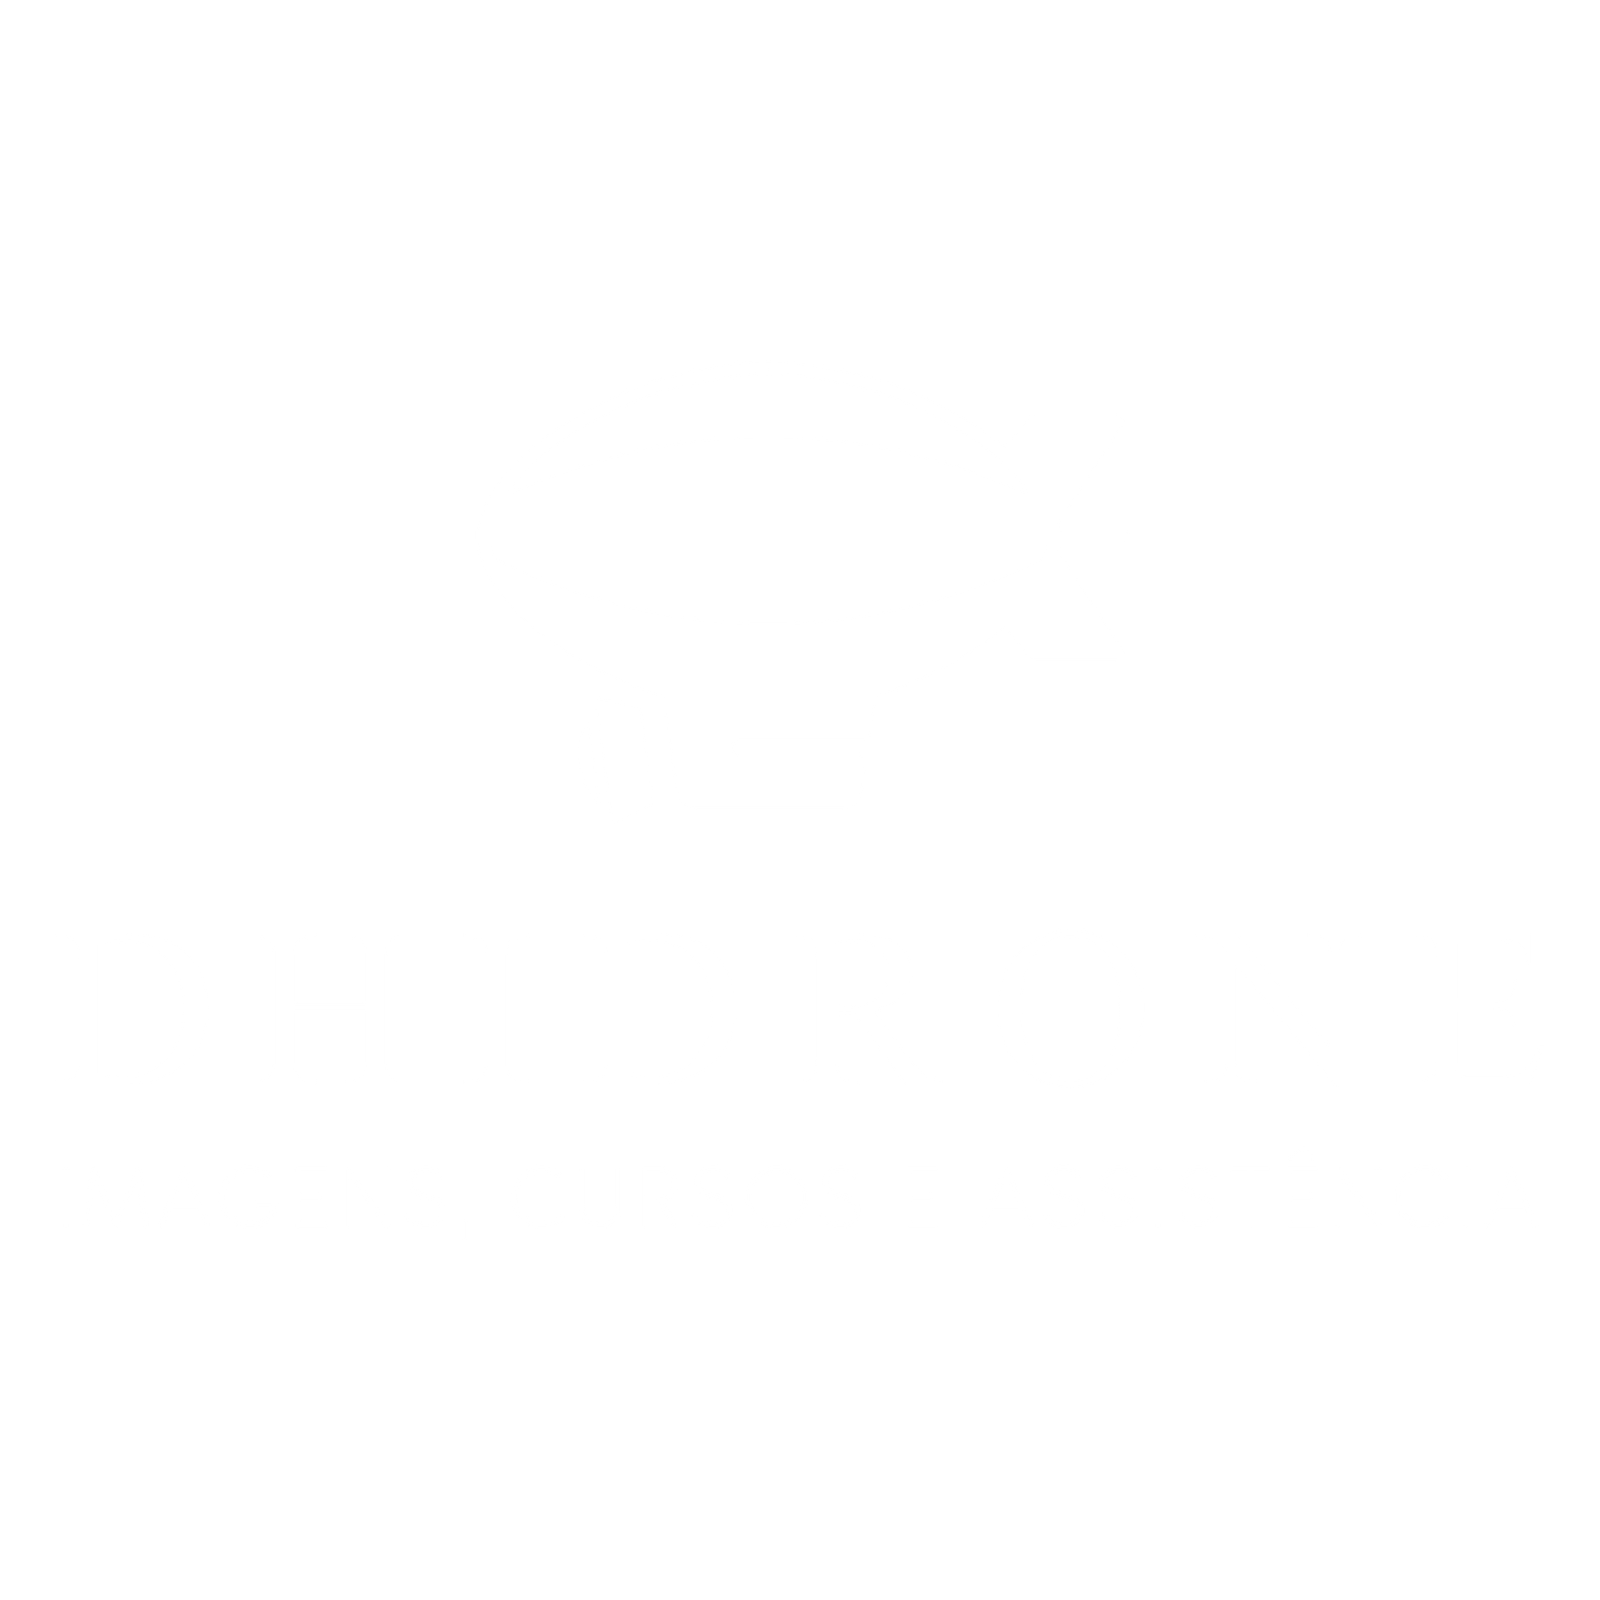 Dhidrone